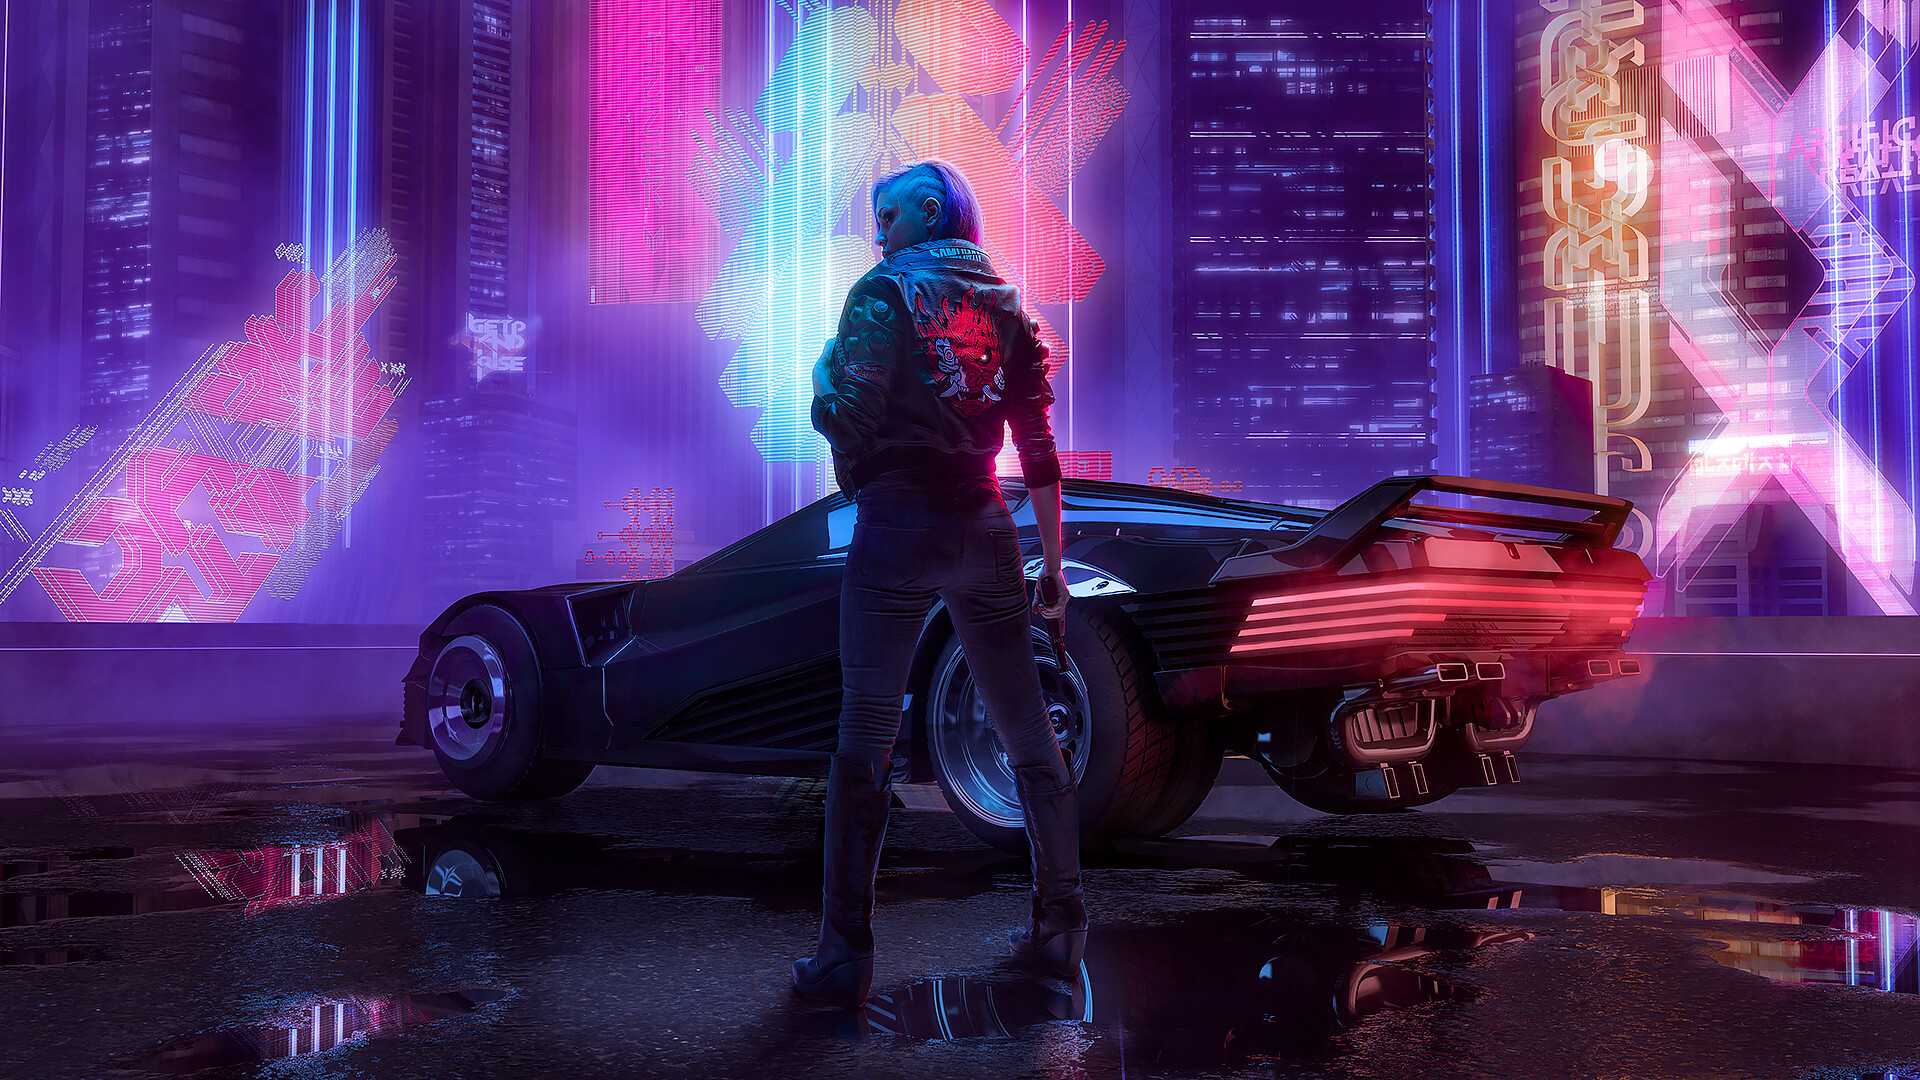 HQ Cyberpunk 2077 Background Images